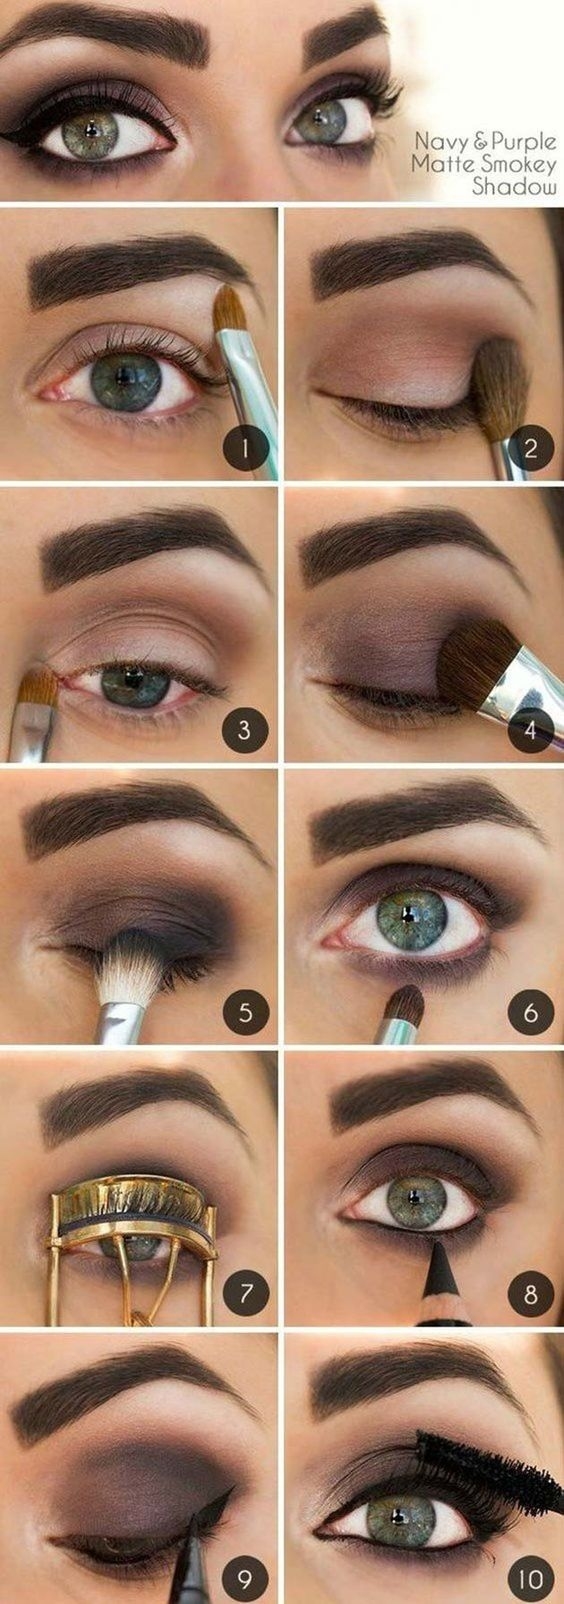 10 Step By Step Makeup Tutorials For Green Eyes - Her Style Code regarding What Color Eyeshadow For Blue Green Eyes And Dark Hair